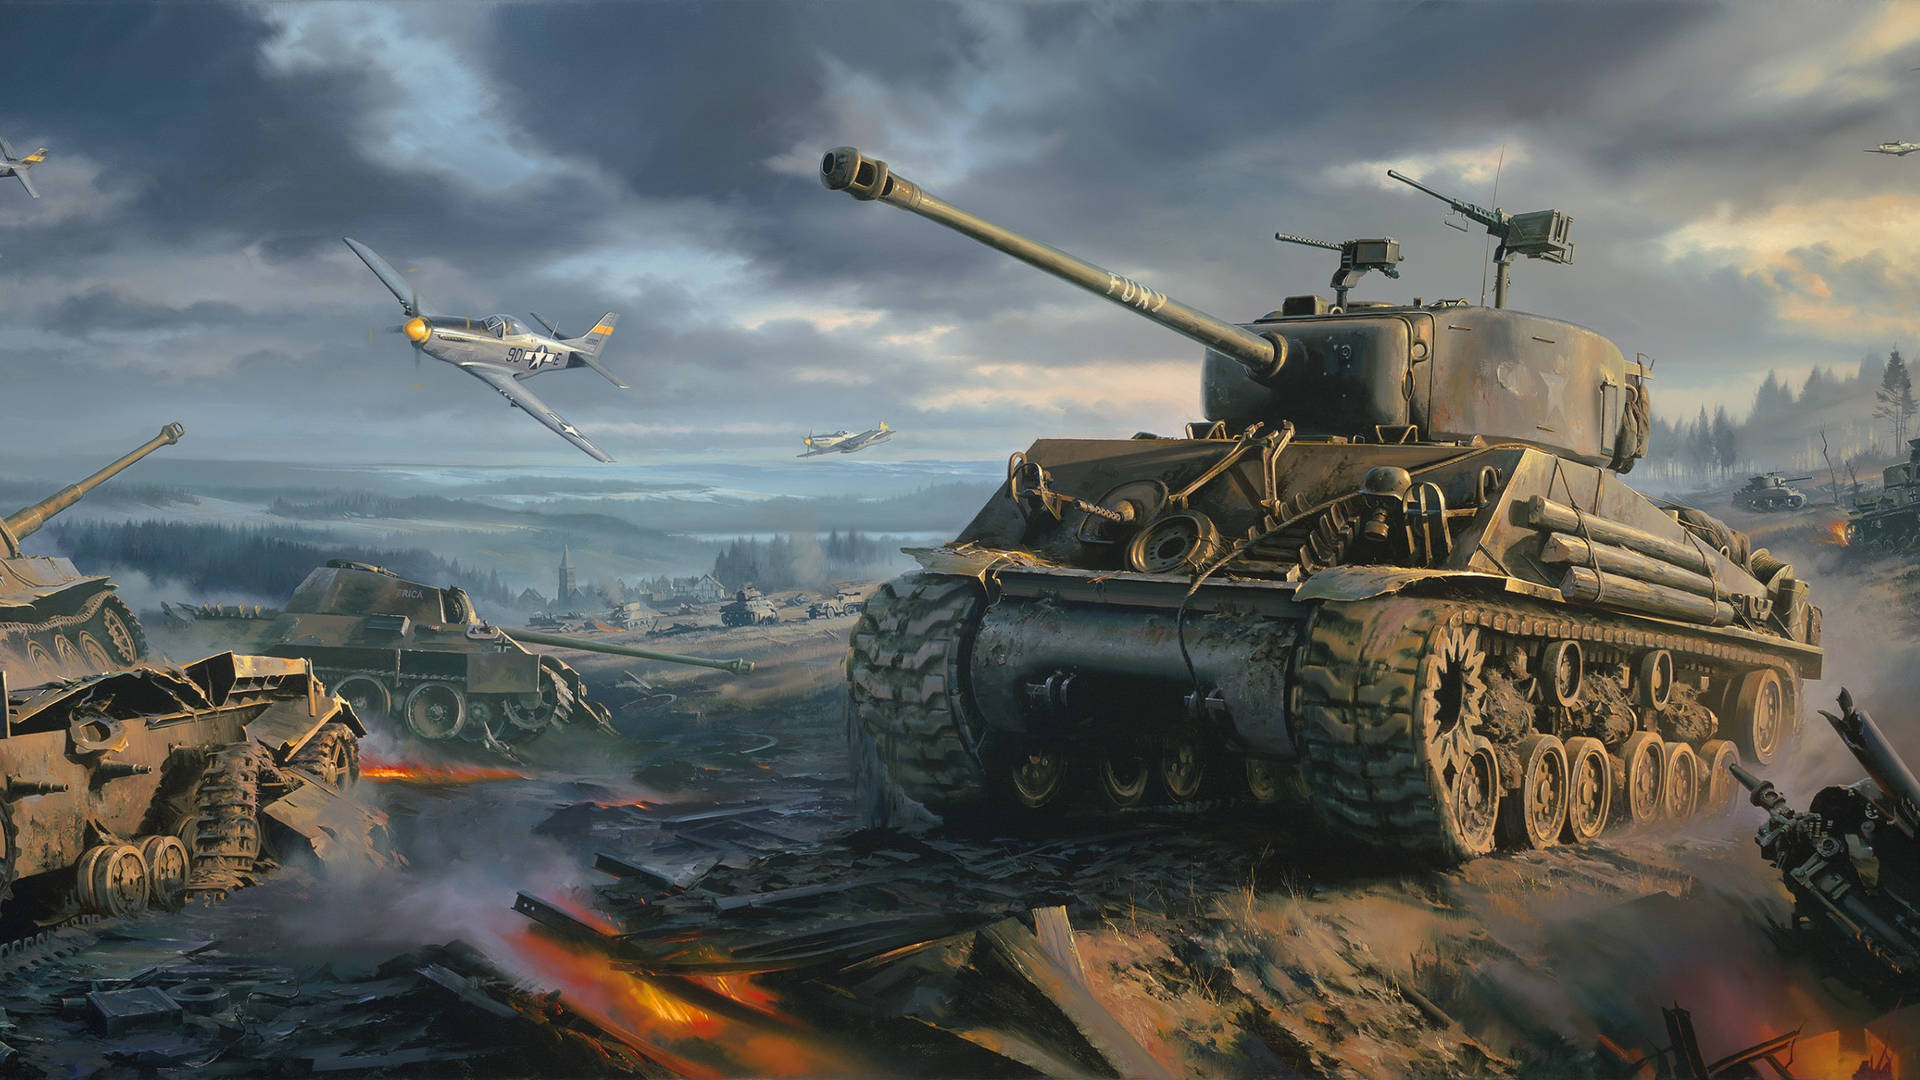 Big Military Tanks For Battle Background